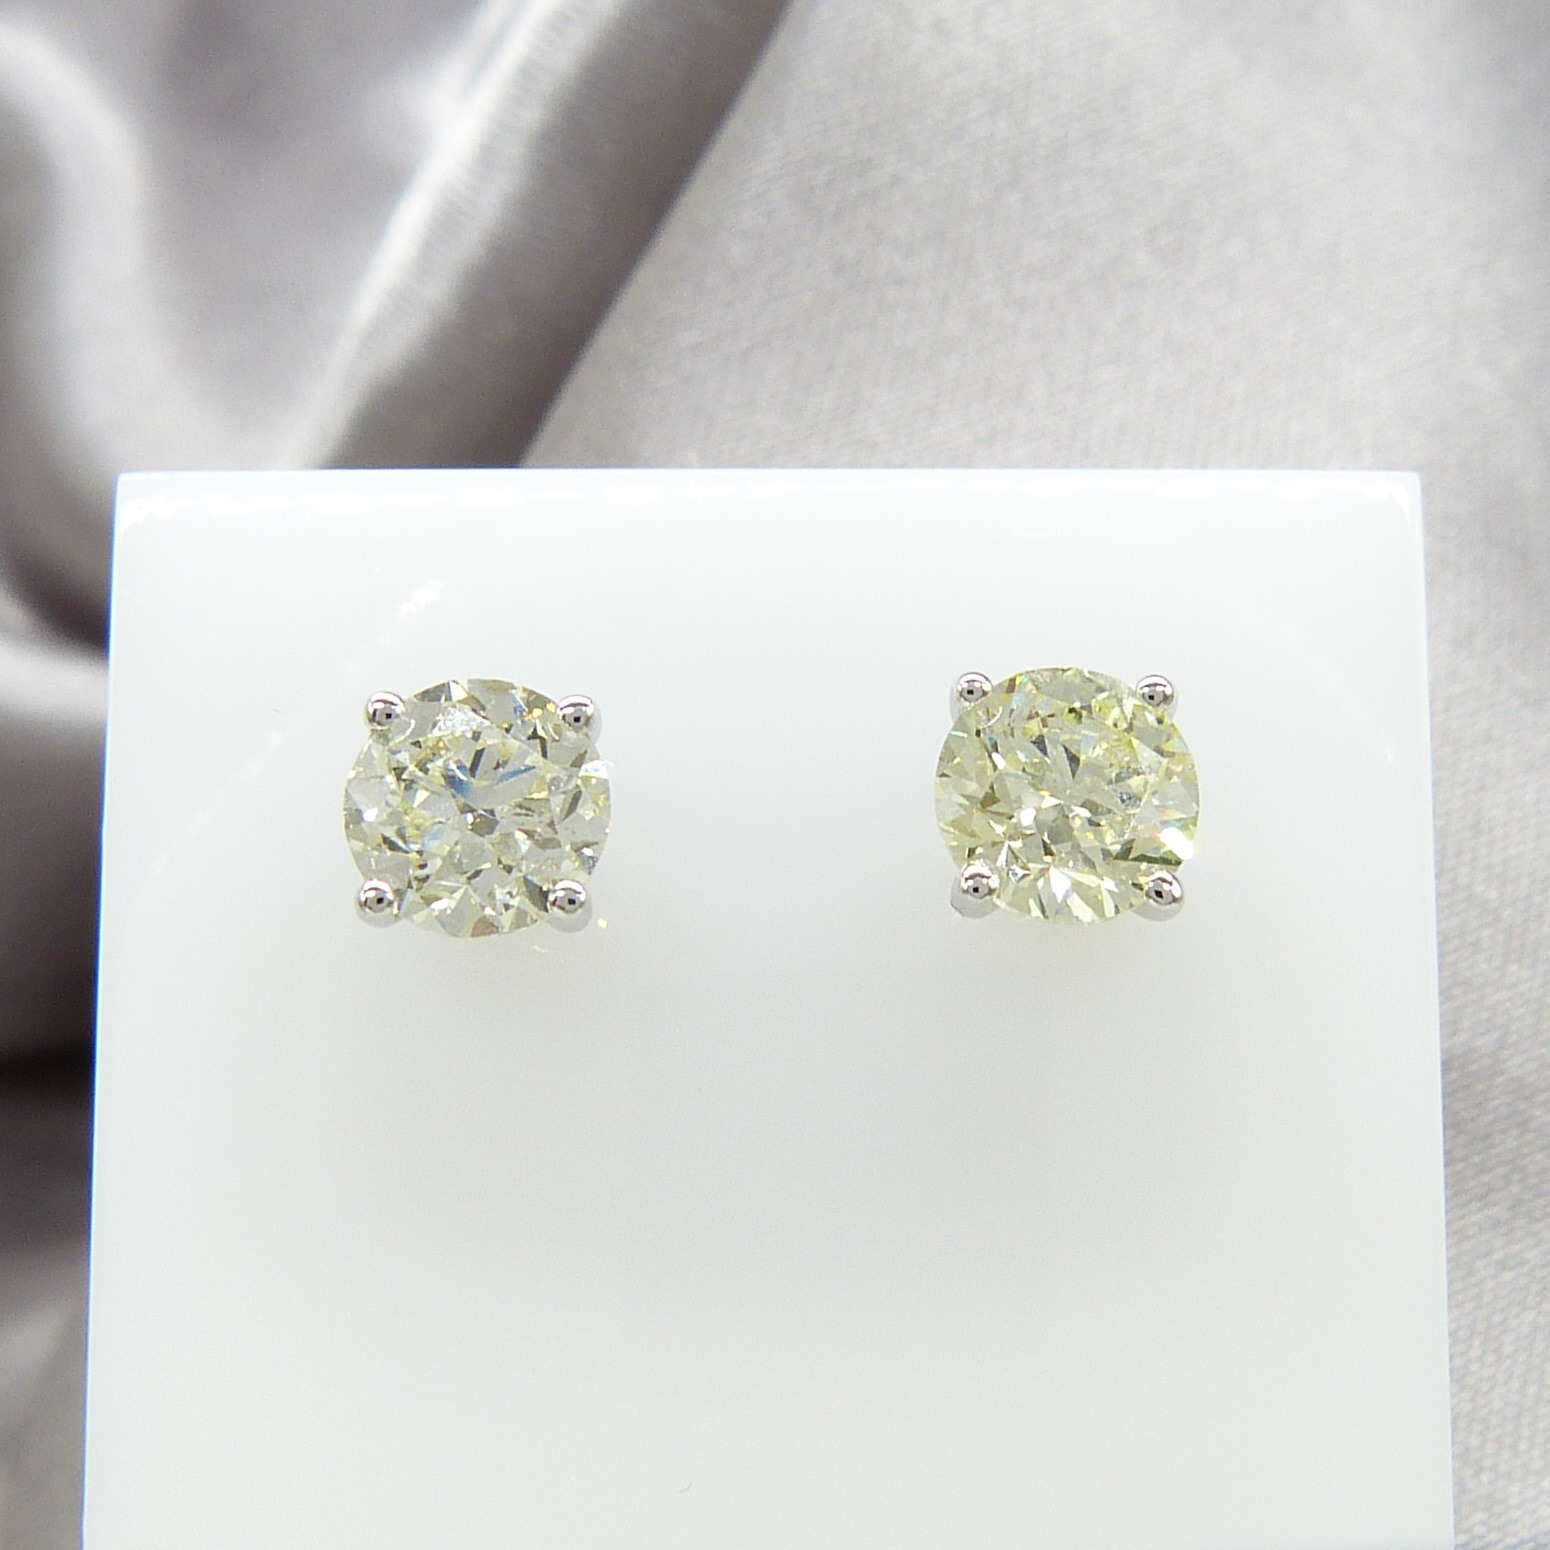 1.32 Carat Diamond Stud Earrings In 18ct White Gold, Certificated and Boxed - Image 2 of 8